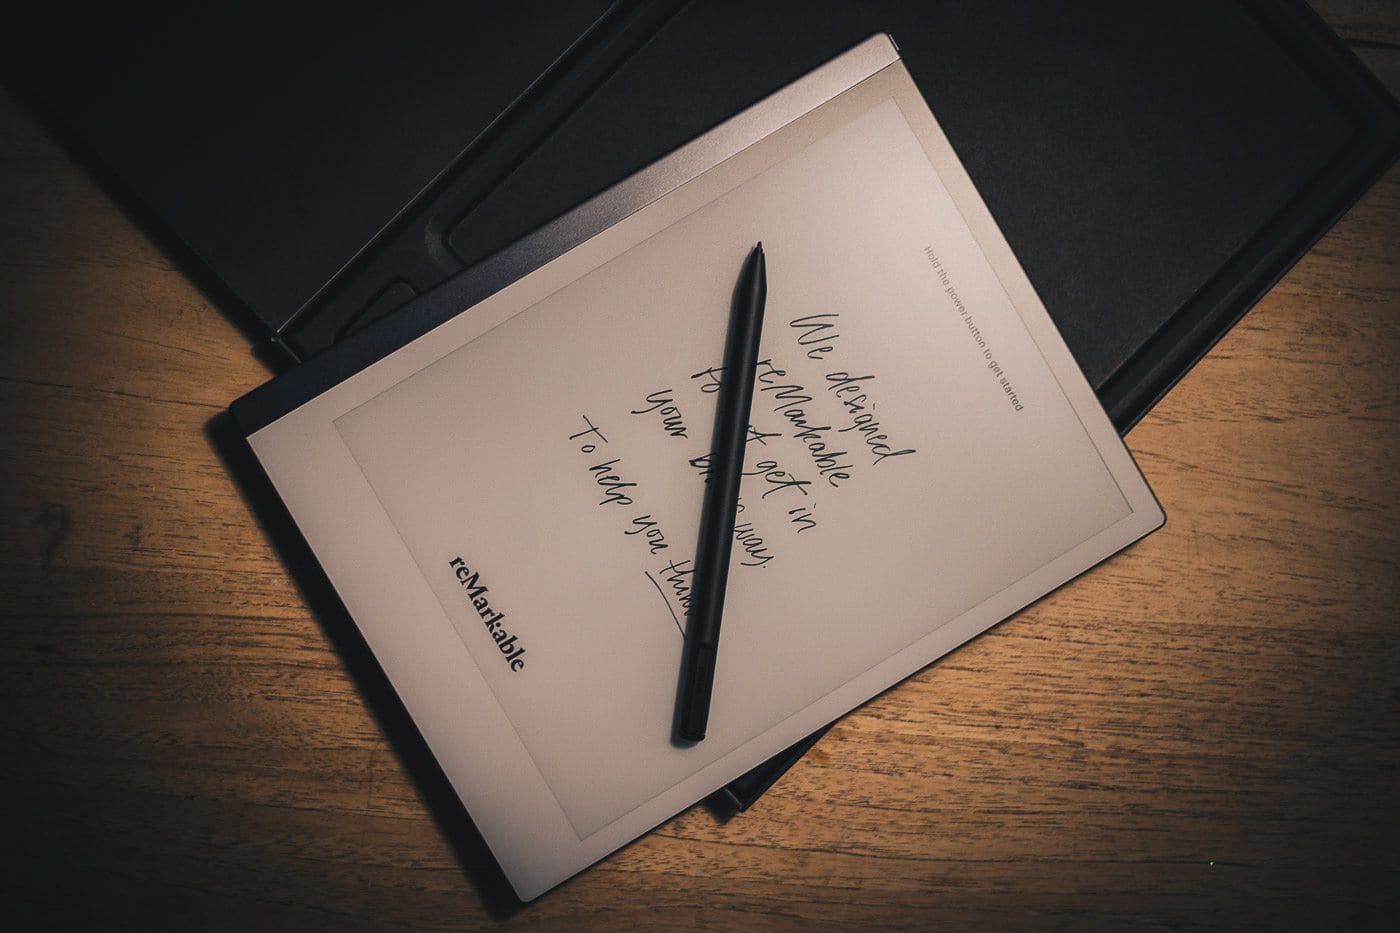 The reMarkable tablet wants to replace all your paper notebooks